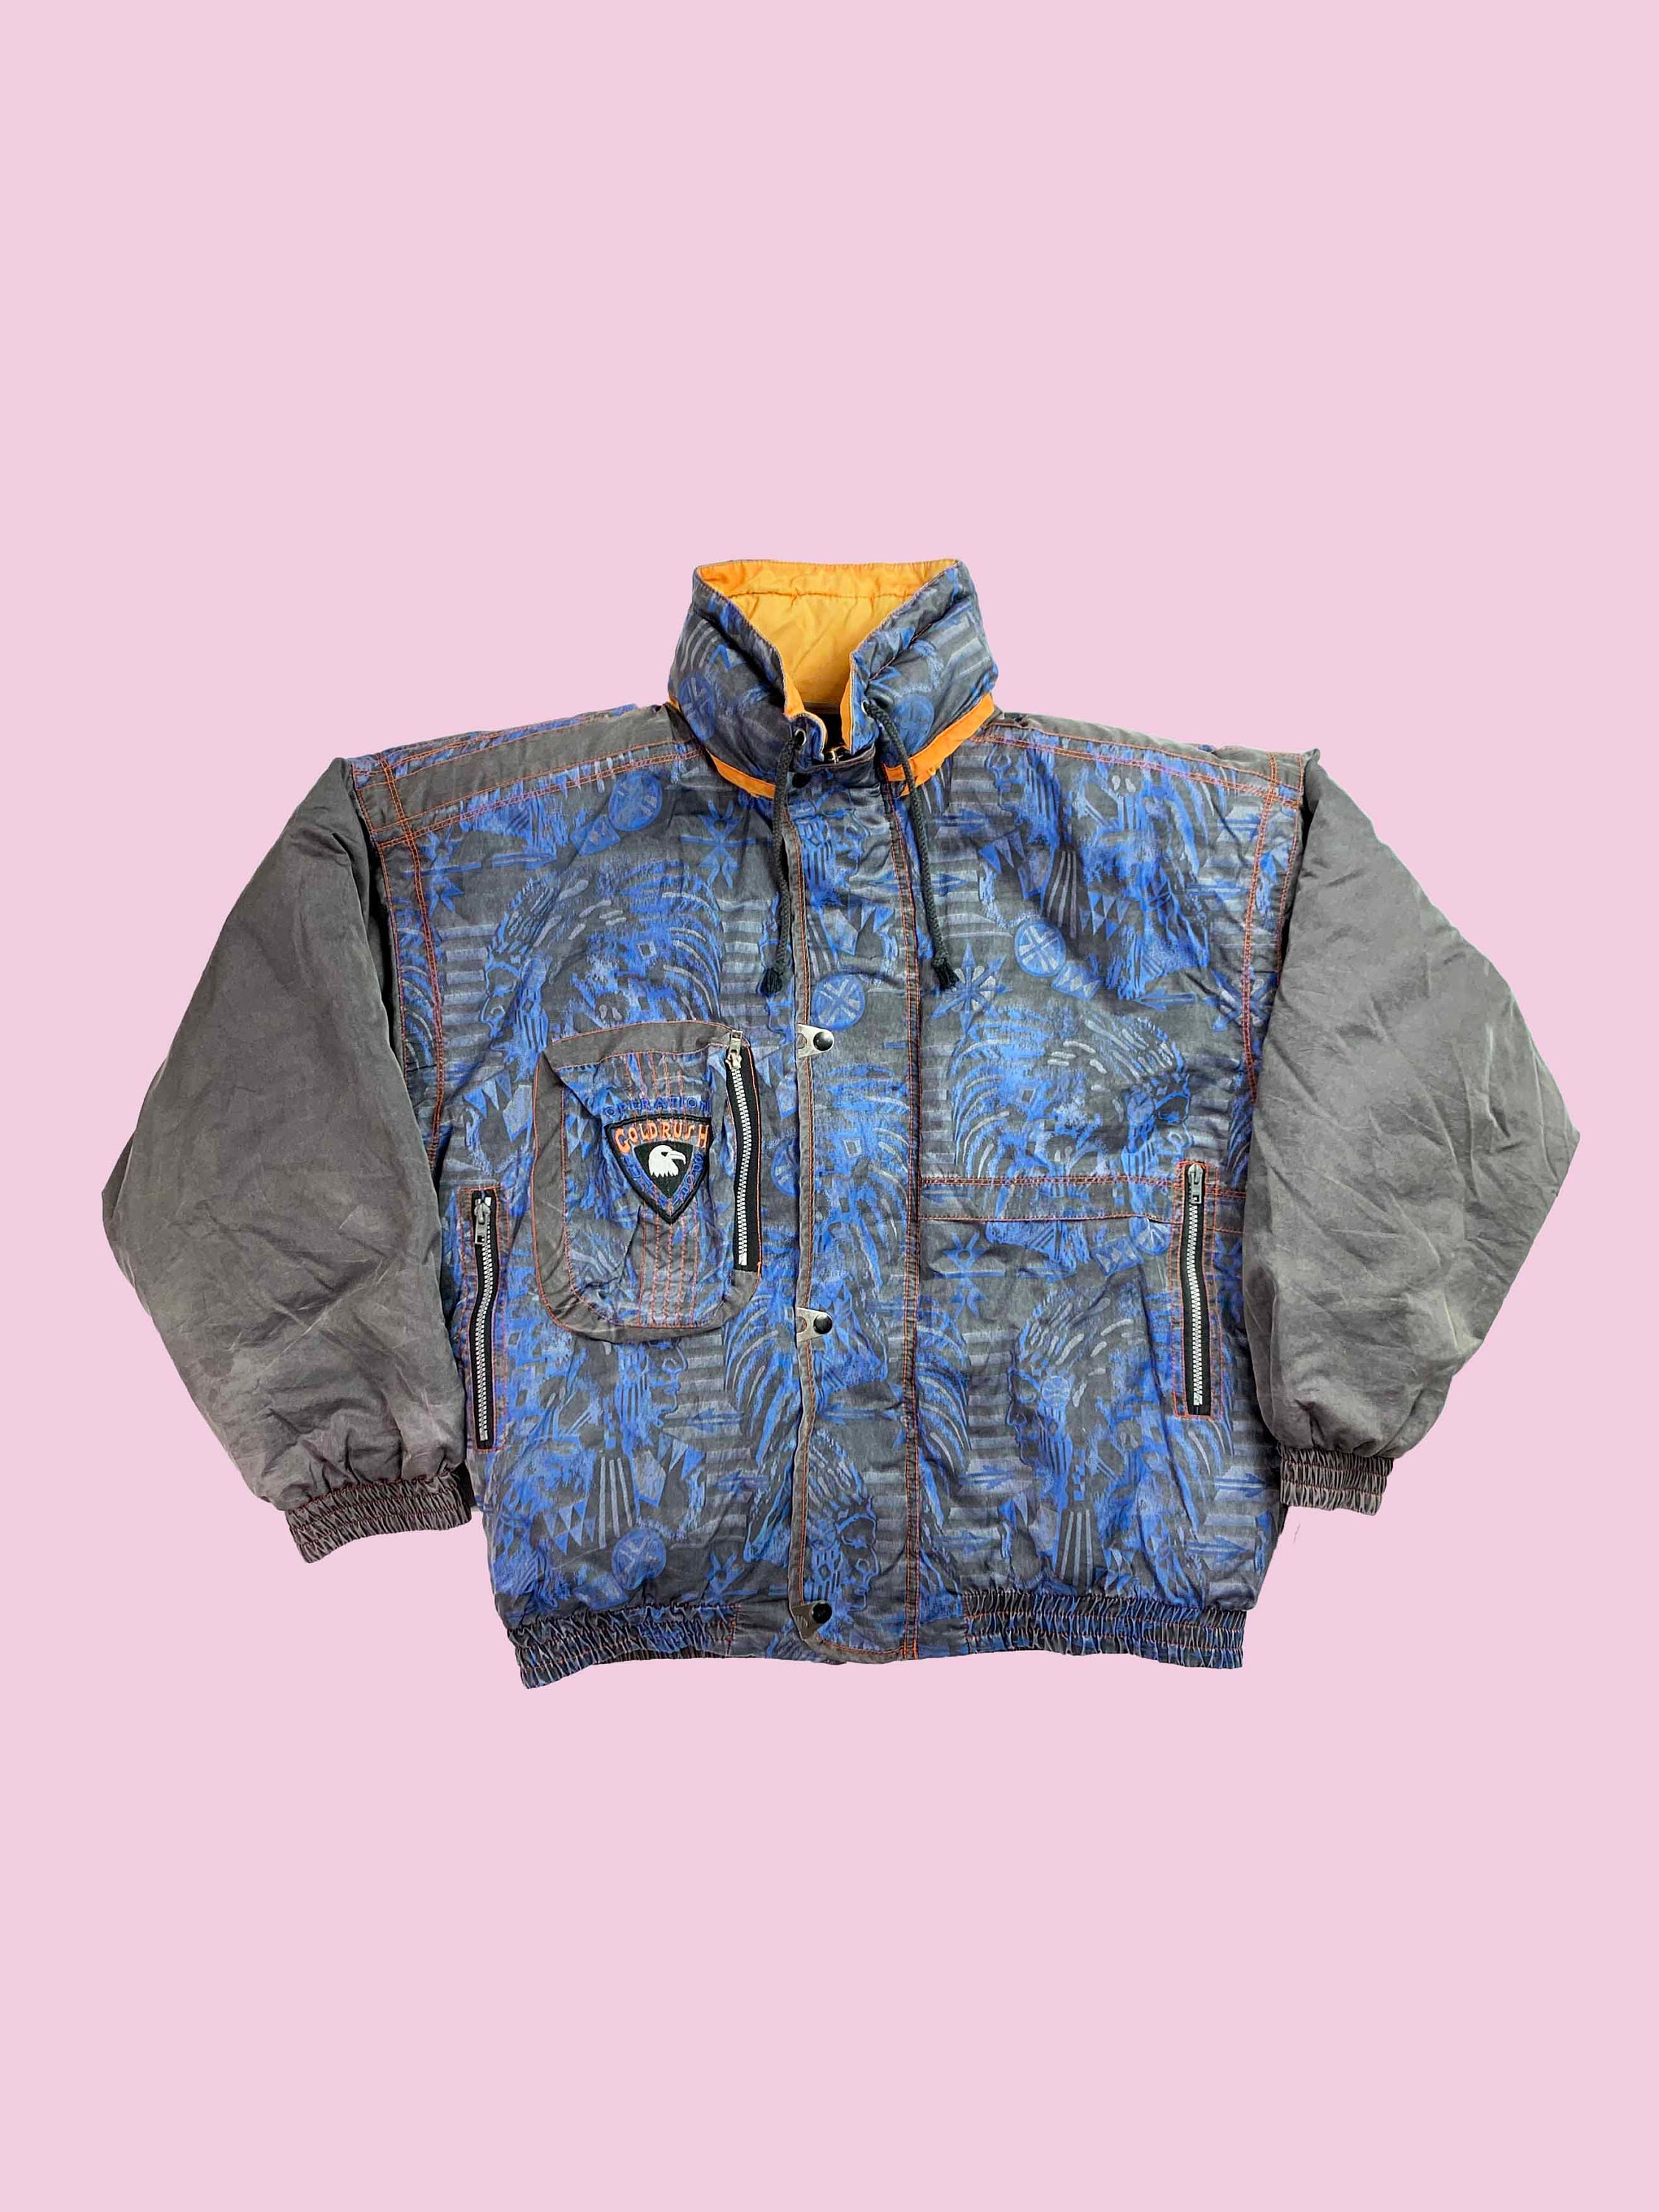 Buy Louis Vuitton 21SS Damier Checker Print Parachute Parka Windbreaker  Nylon Jacket RM211-ZWT-HKB85W Blue 48 Blue from Japan - Buy authentic Plus  exclusive items from Japan